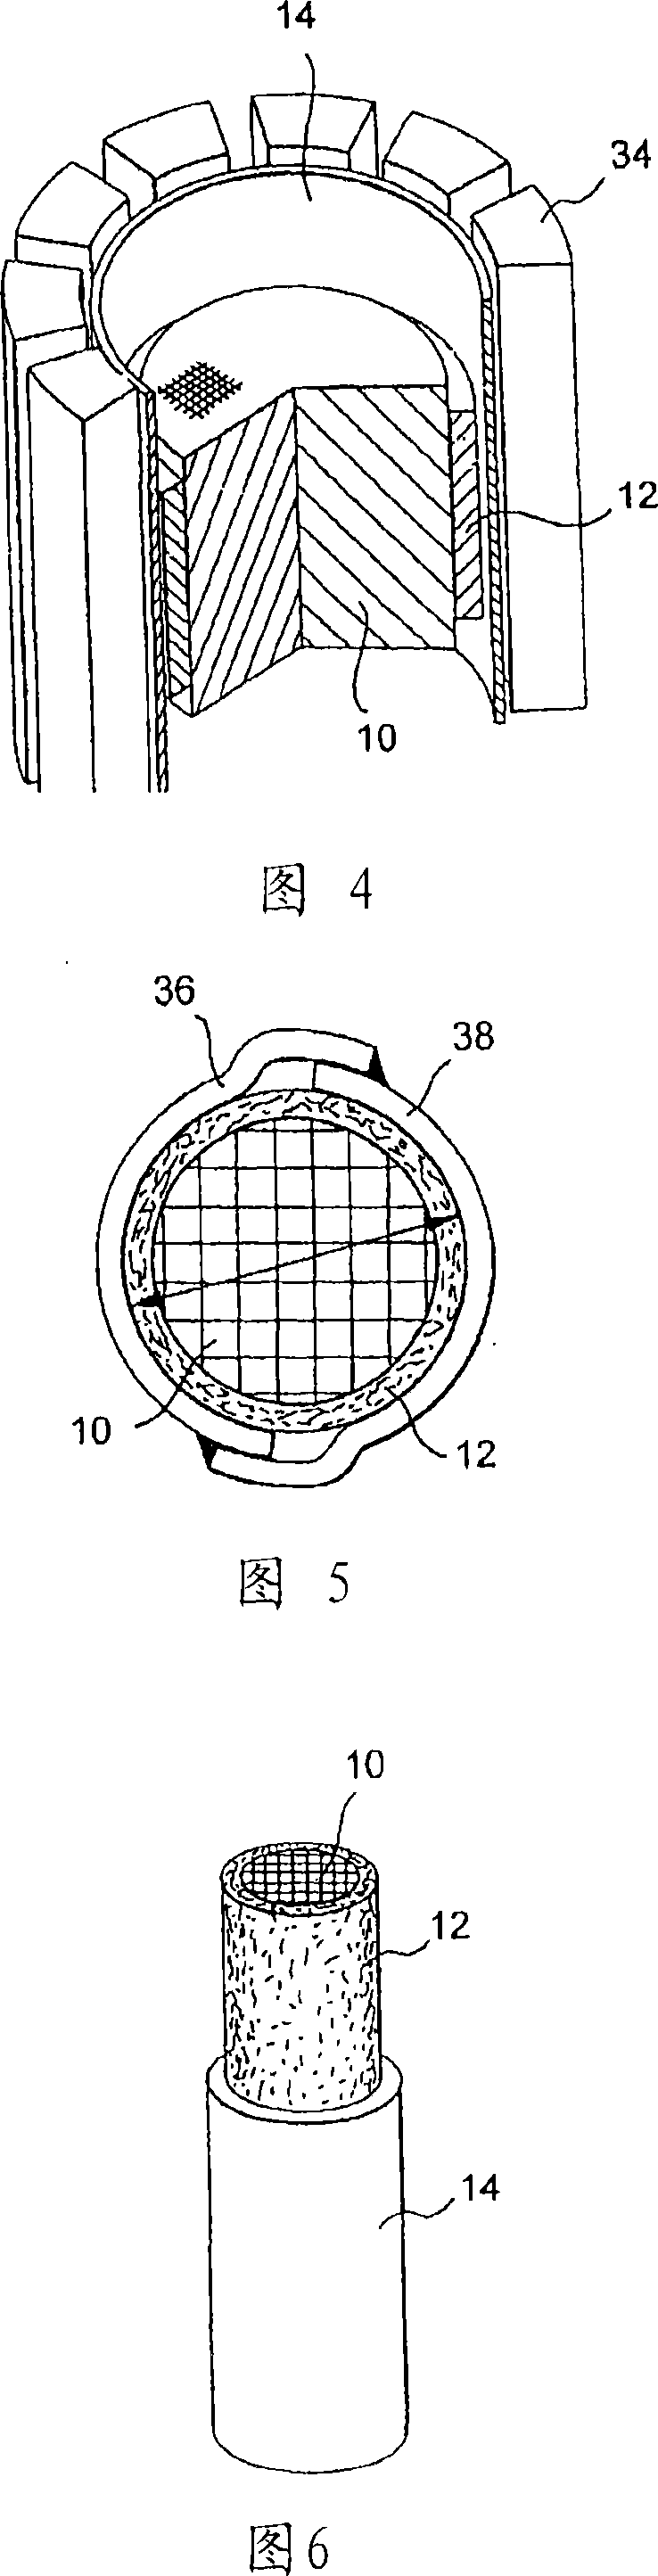 Method of producing exhaust-gas carrying devices, in particular exhaust-gas cleaning devices